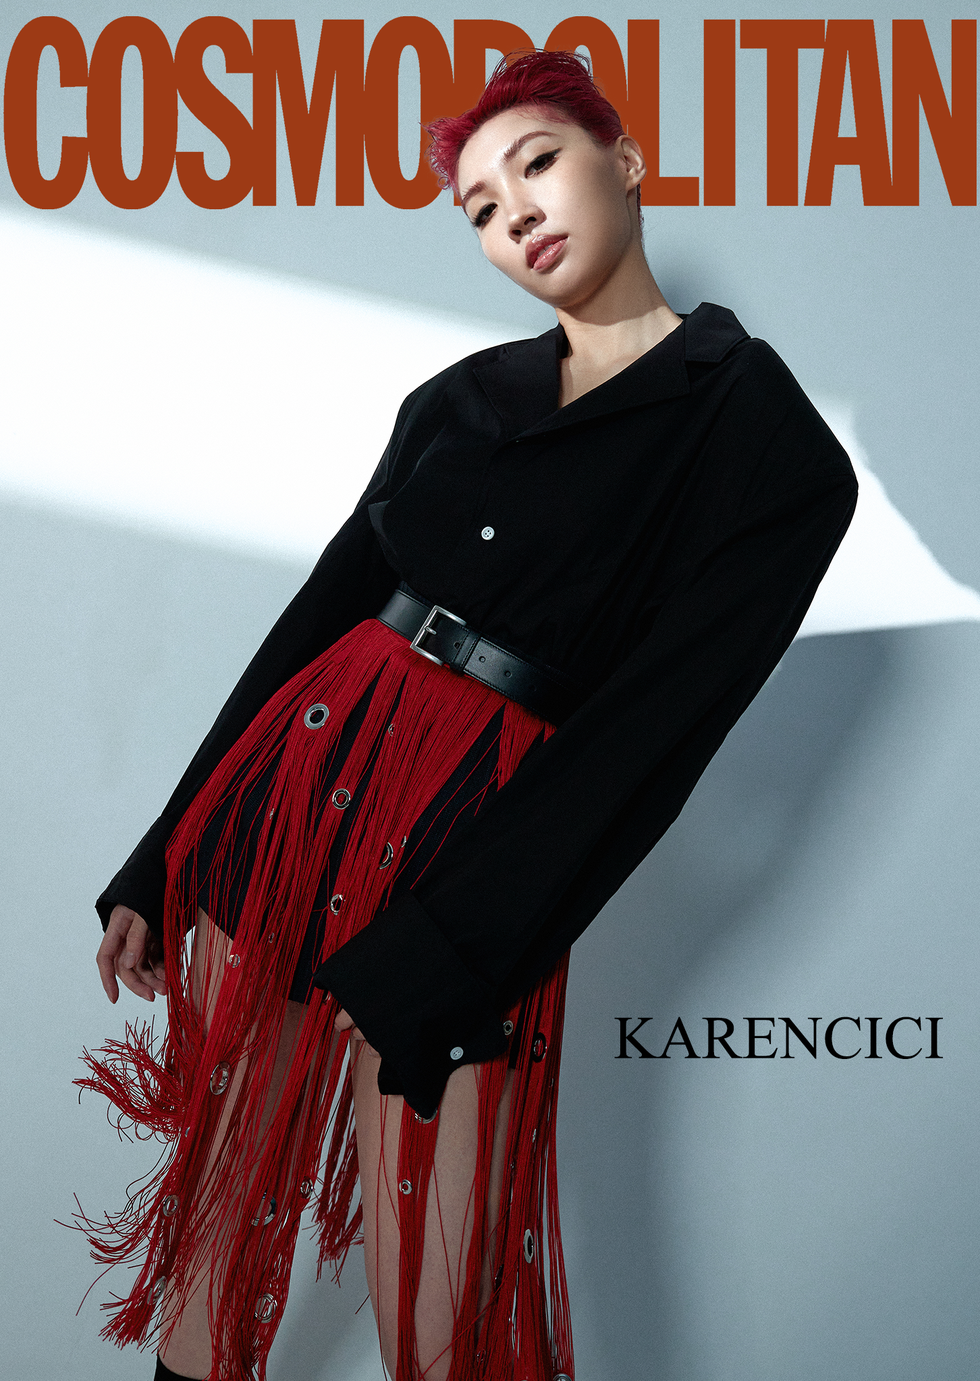 karencici cover